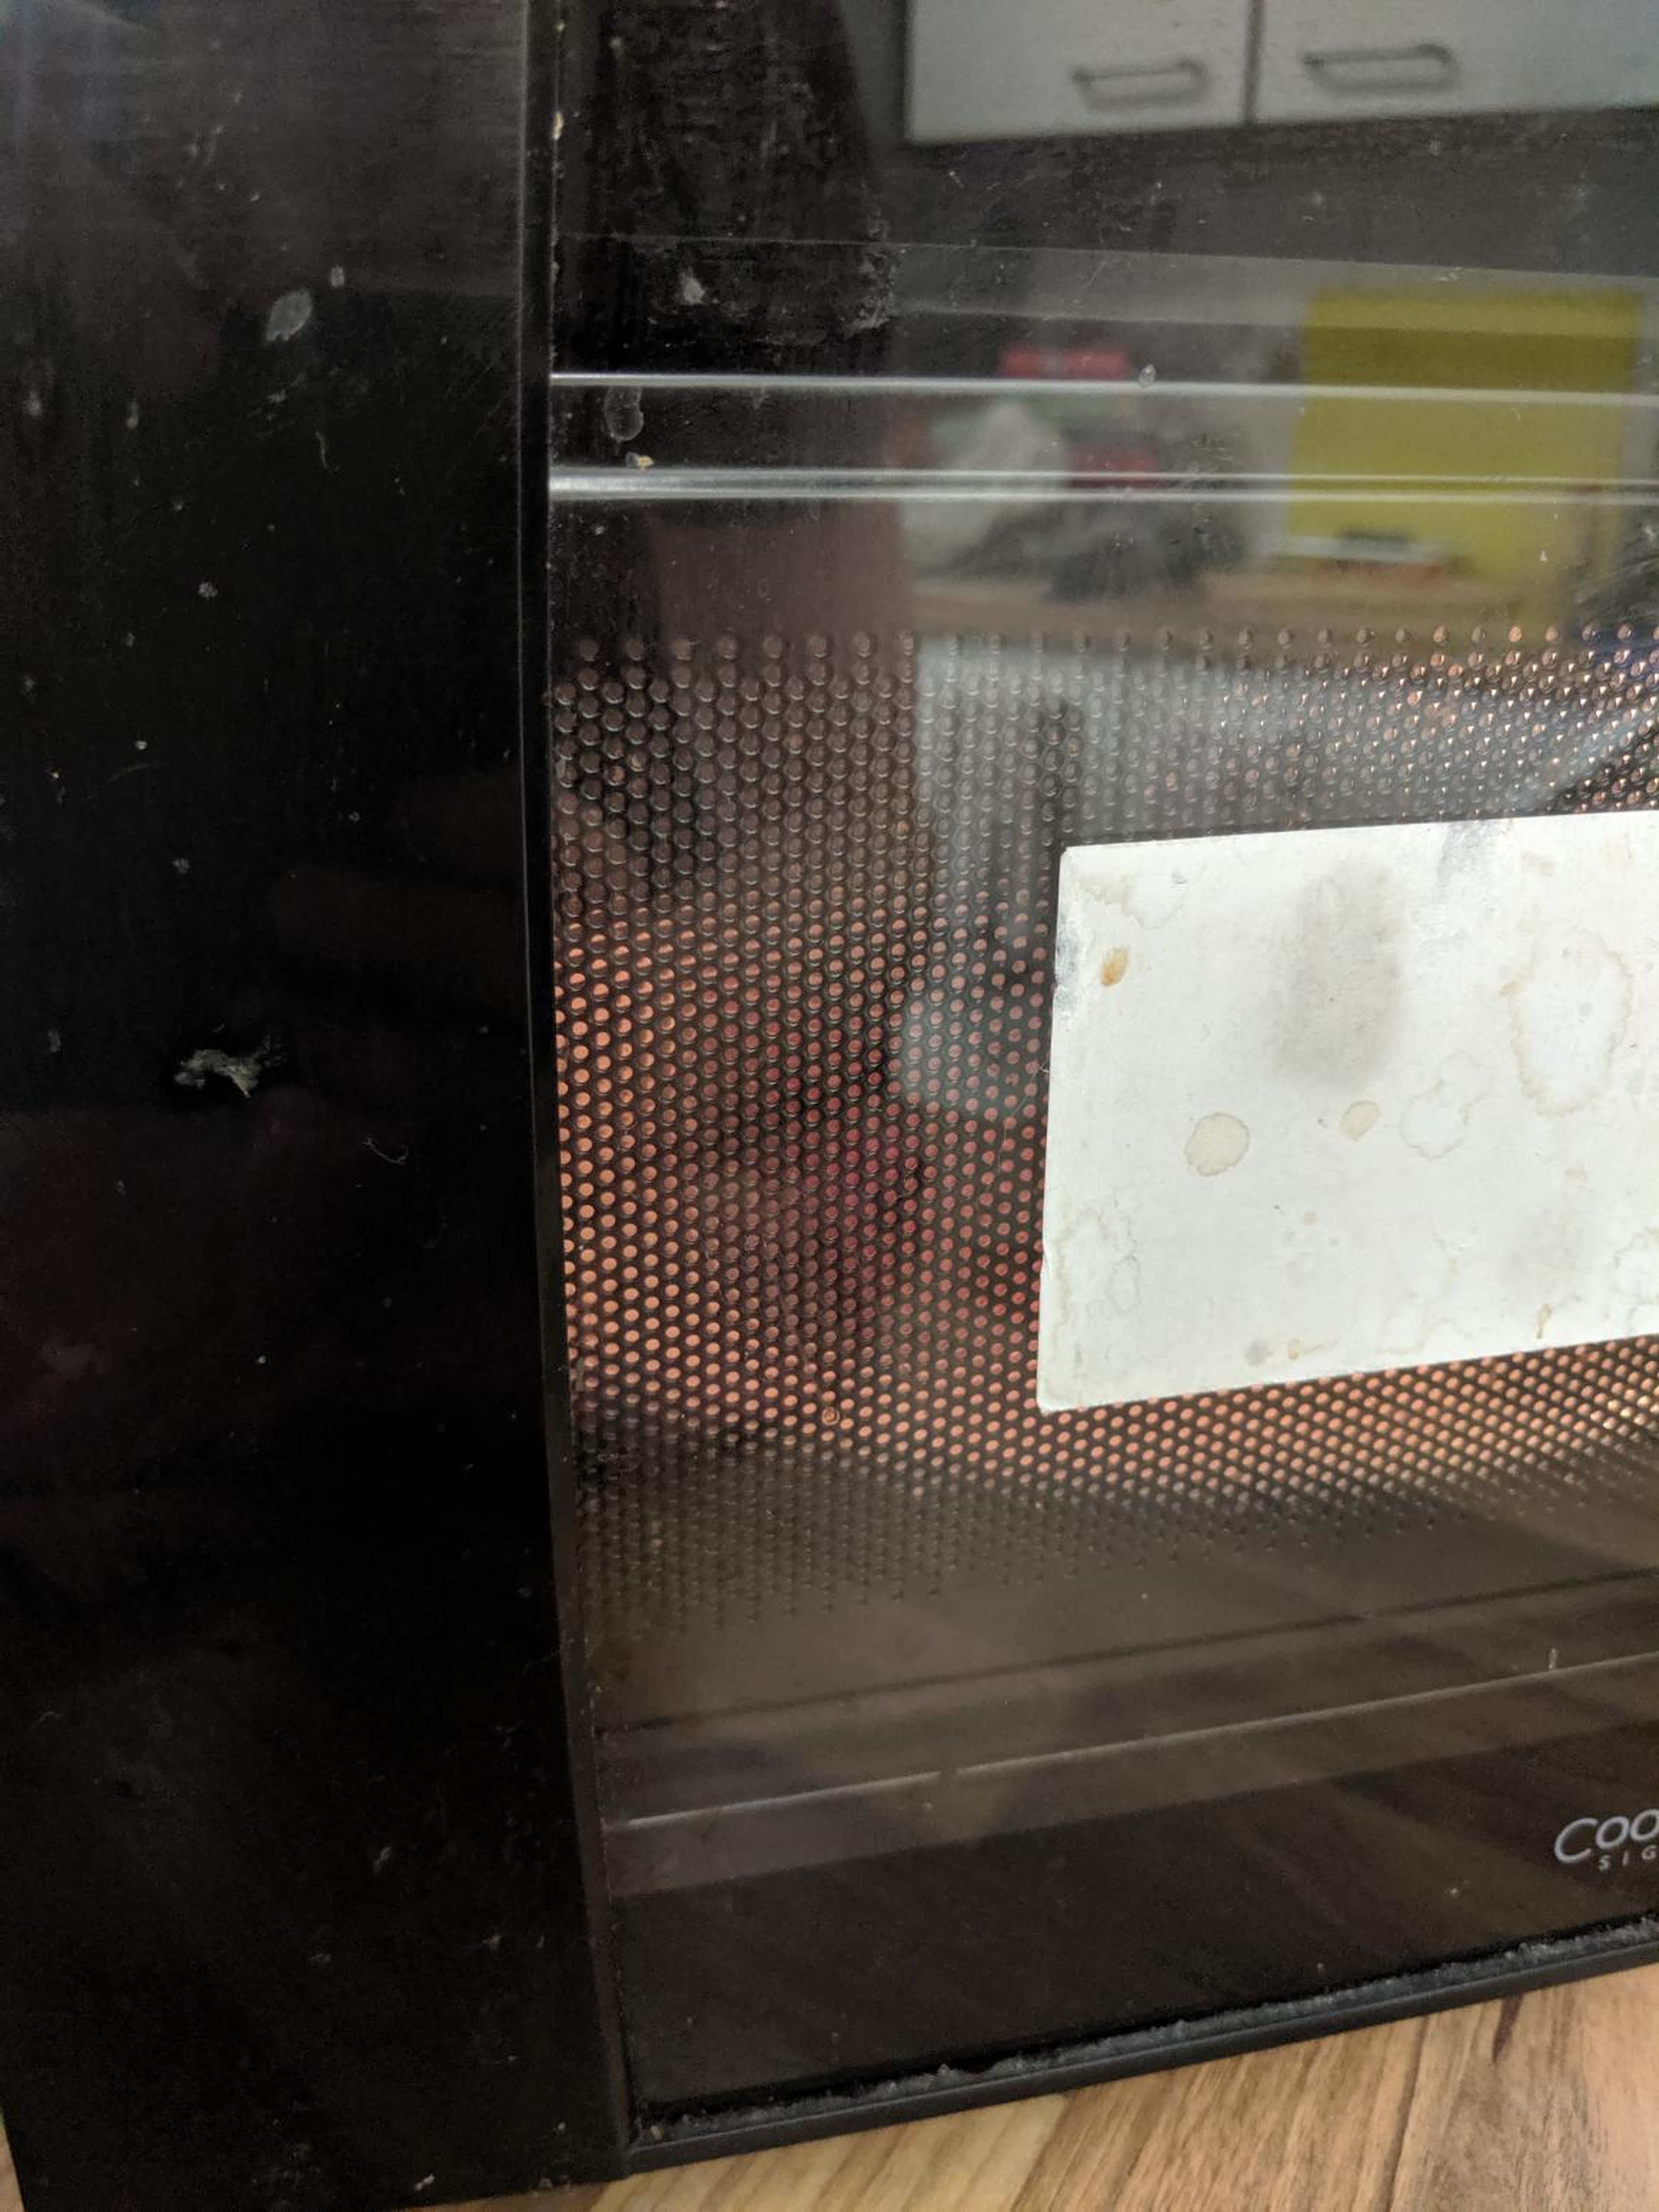 Then it went into the microwave, on a regular plate. "My microwave is not very easy to see through, but here is my best attempt at a photo where the meat is at least partly visible."